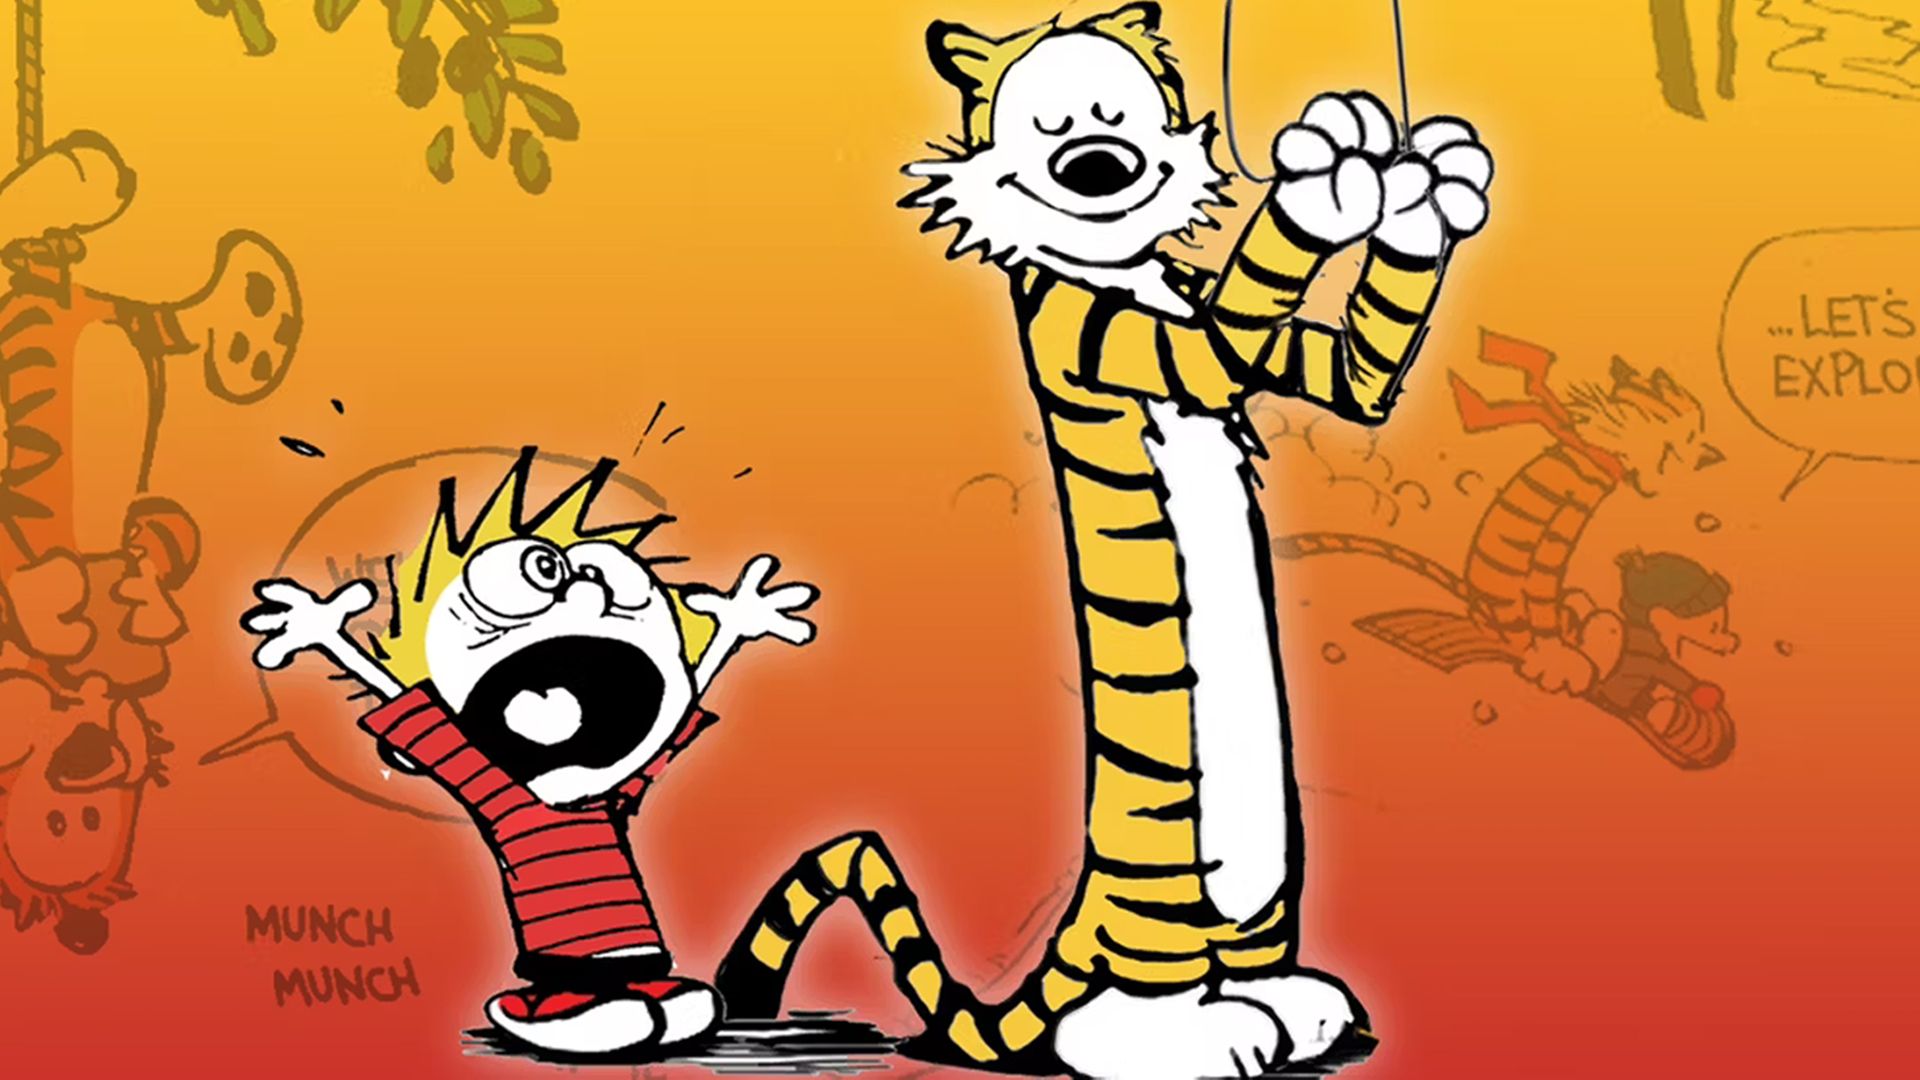 A collage of Calvin yelling while Hobbes smiles calmly in front of other Calvin and Hobbes strips